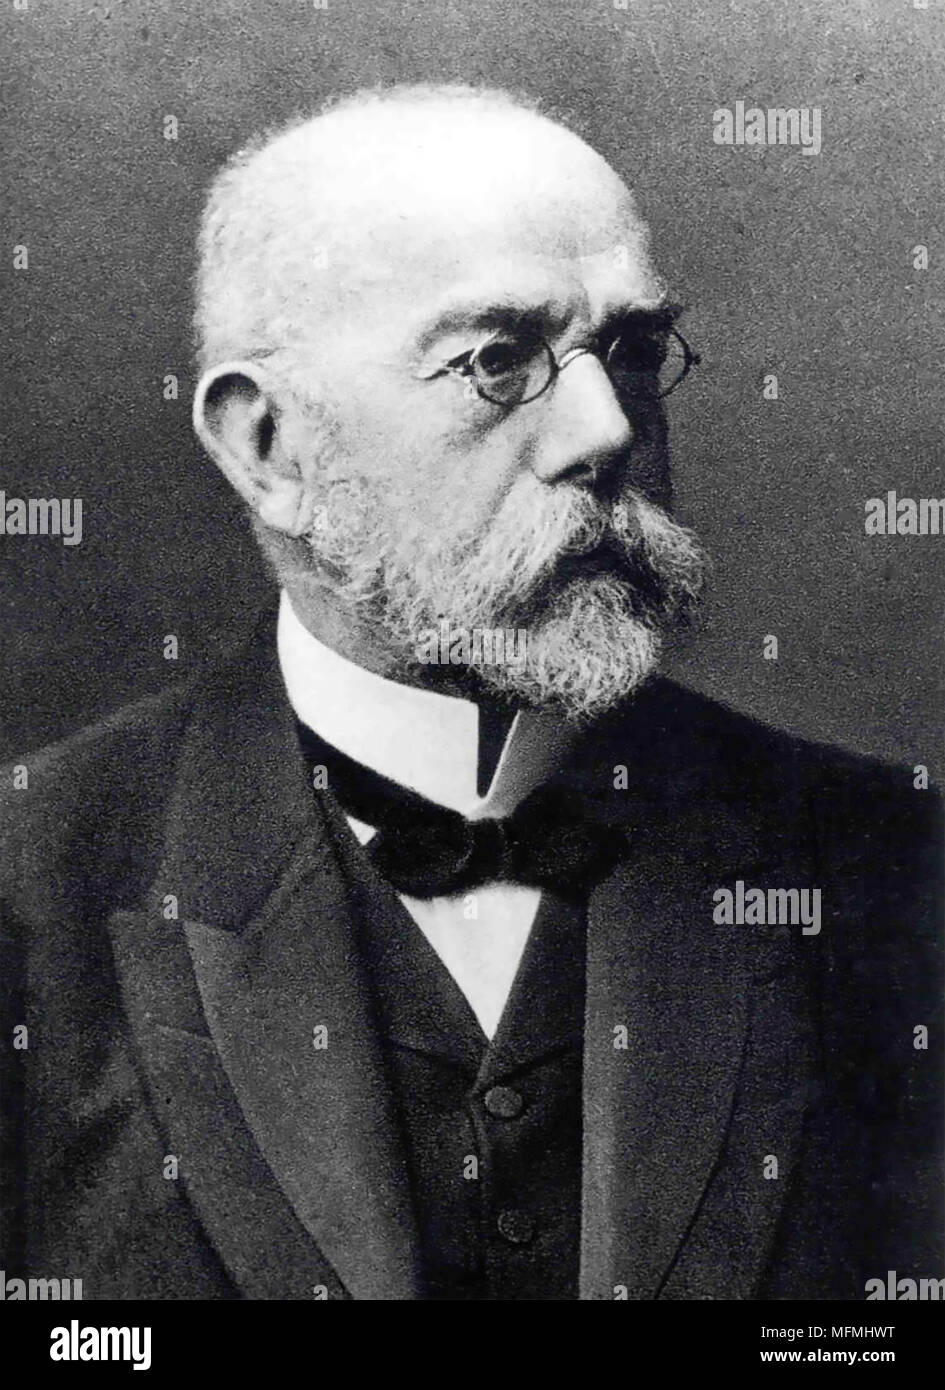 ROBERT KOCH (1843-1910) German physician and microbiologist about 1907 when he received the Nobel Prize in Medicine. Stock Photo